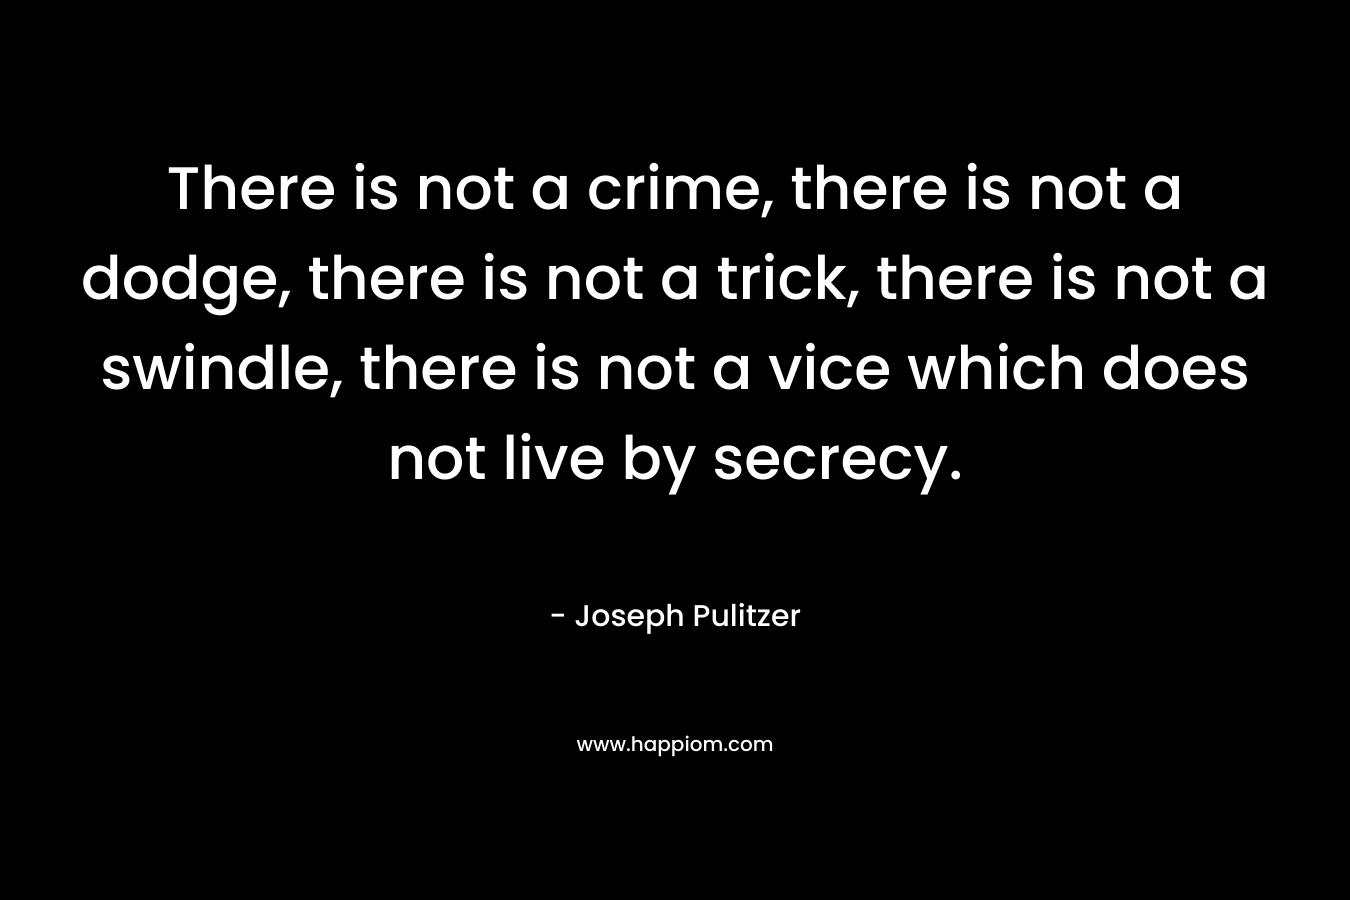 There is not a crime, there is not a dodge, there is not a trick, there is not a swindle, there is not a vice which does not live by secrecy. – Joseph Pulitzer